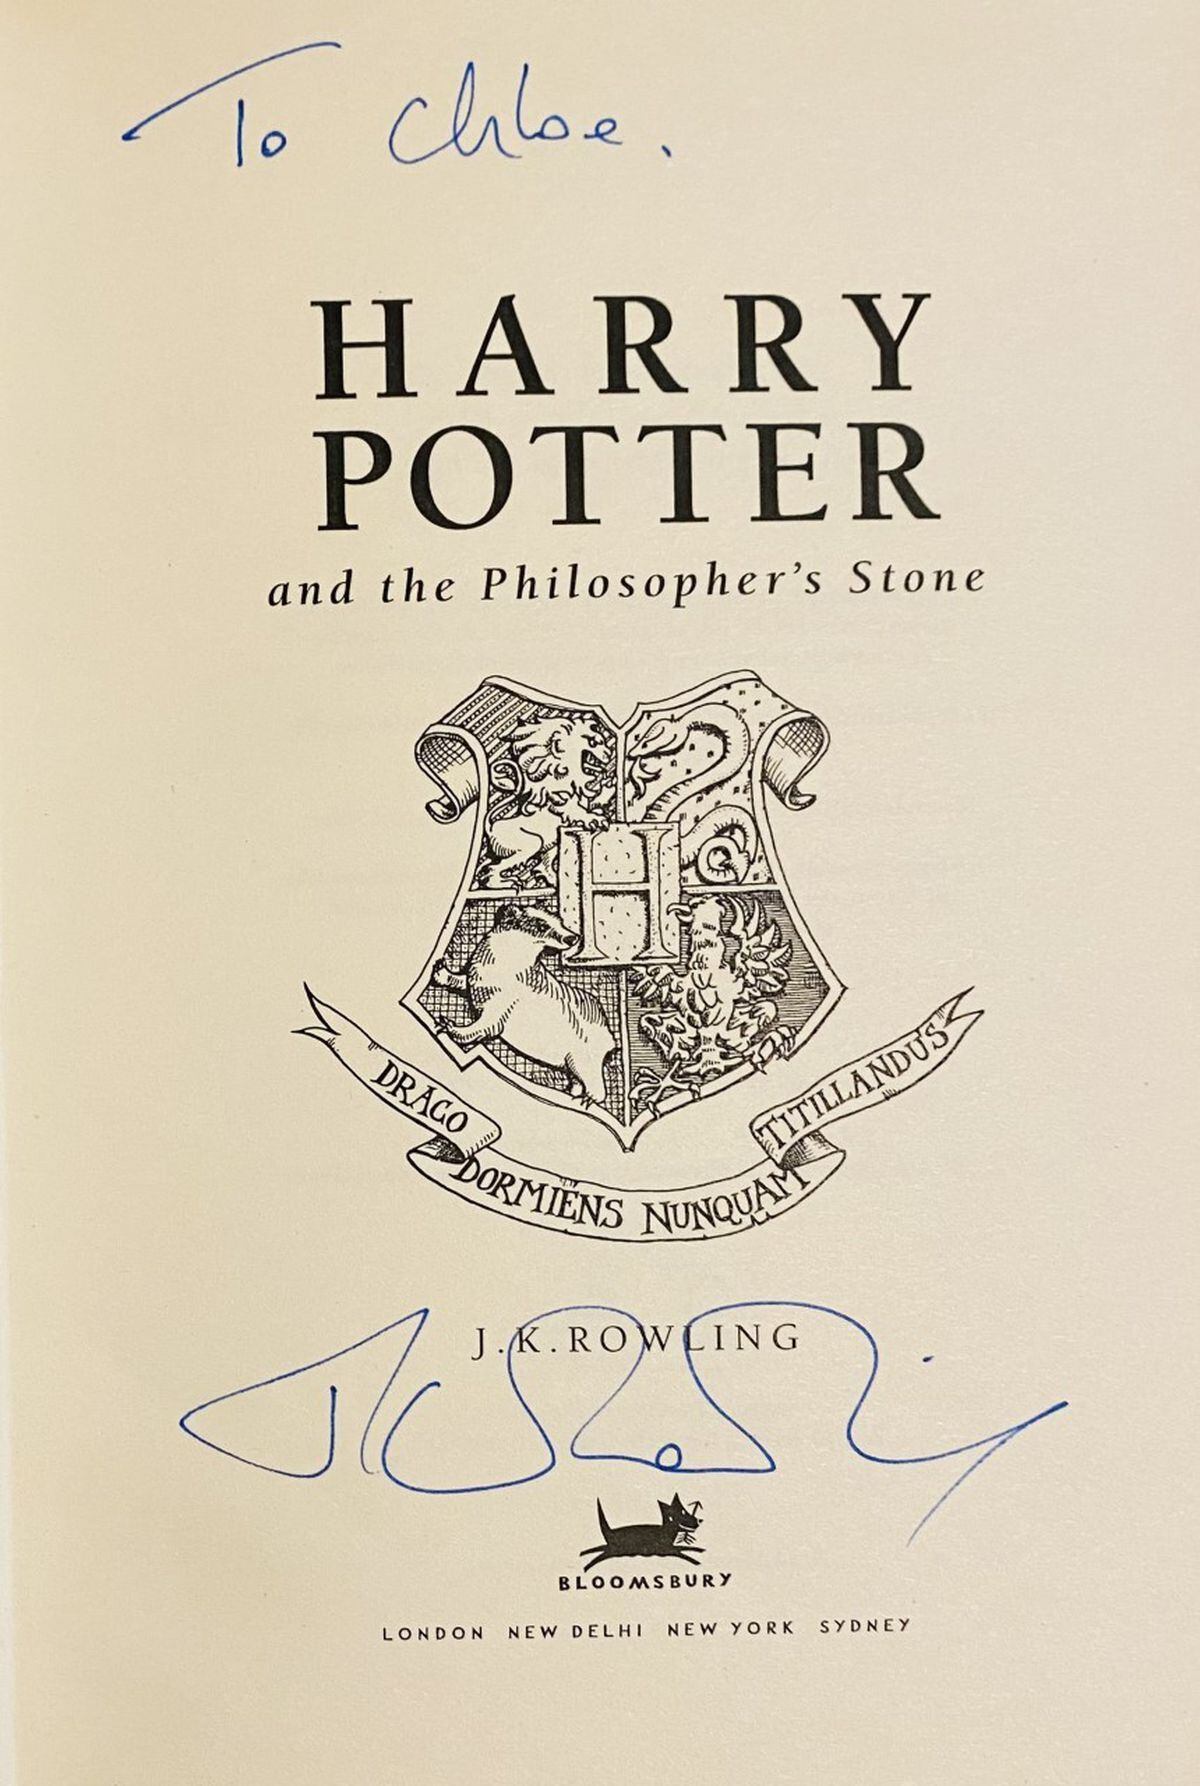 The book is signed by JK Rowling